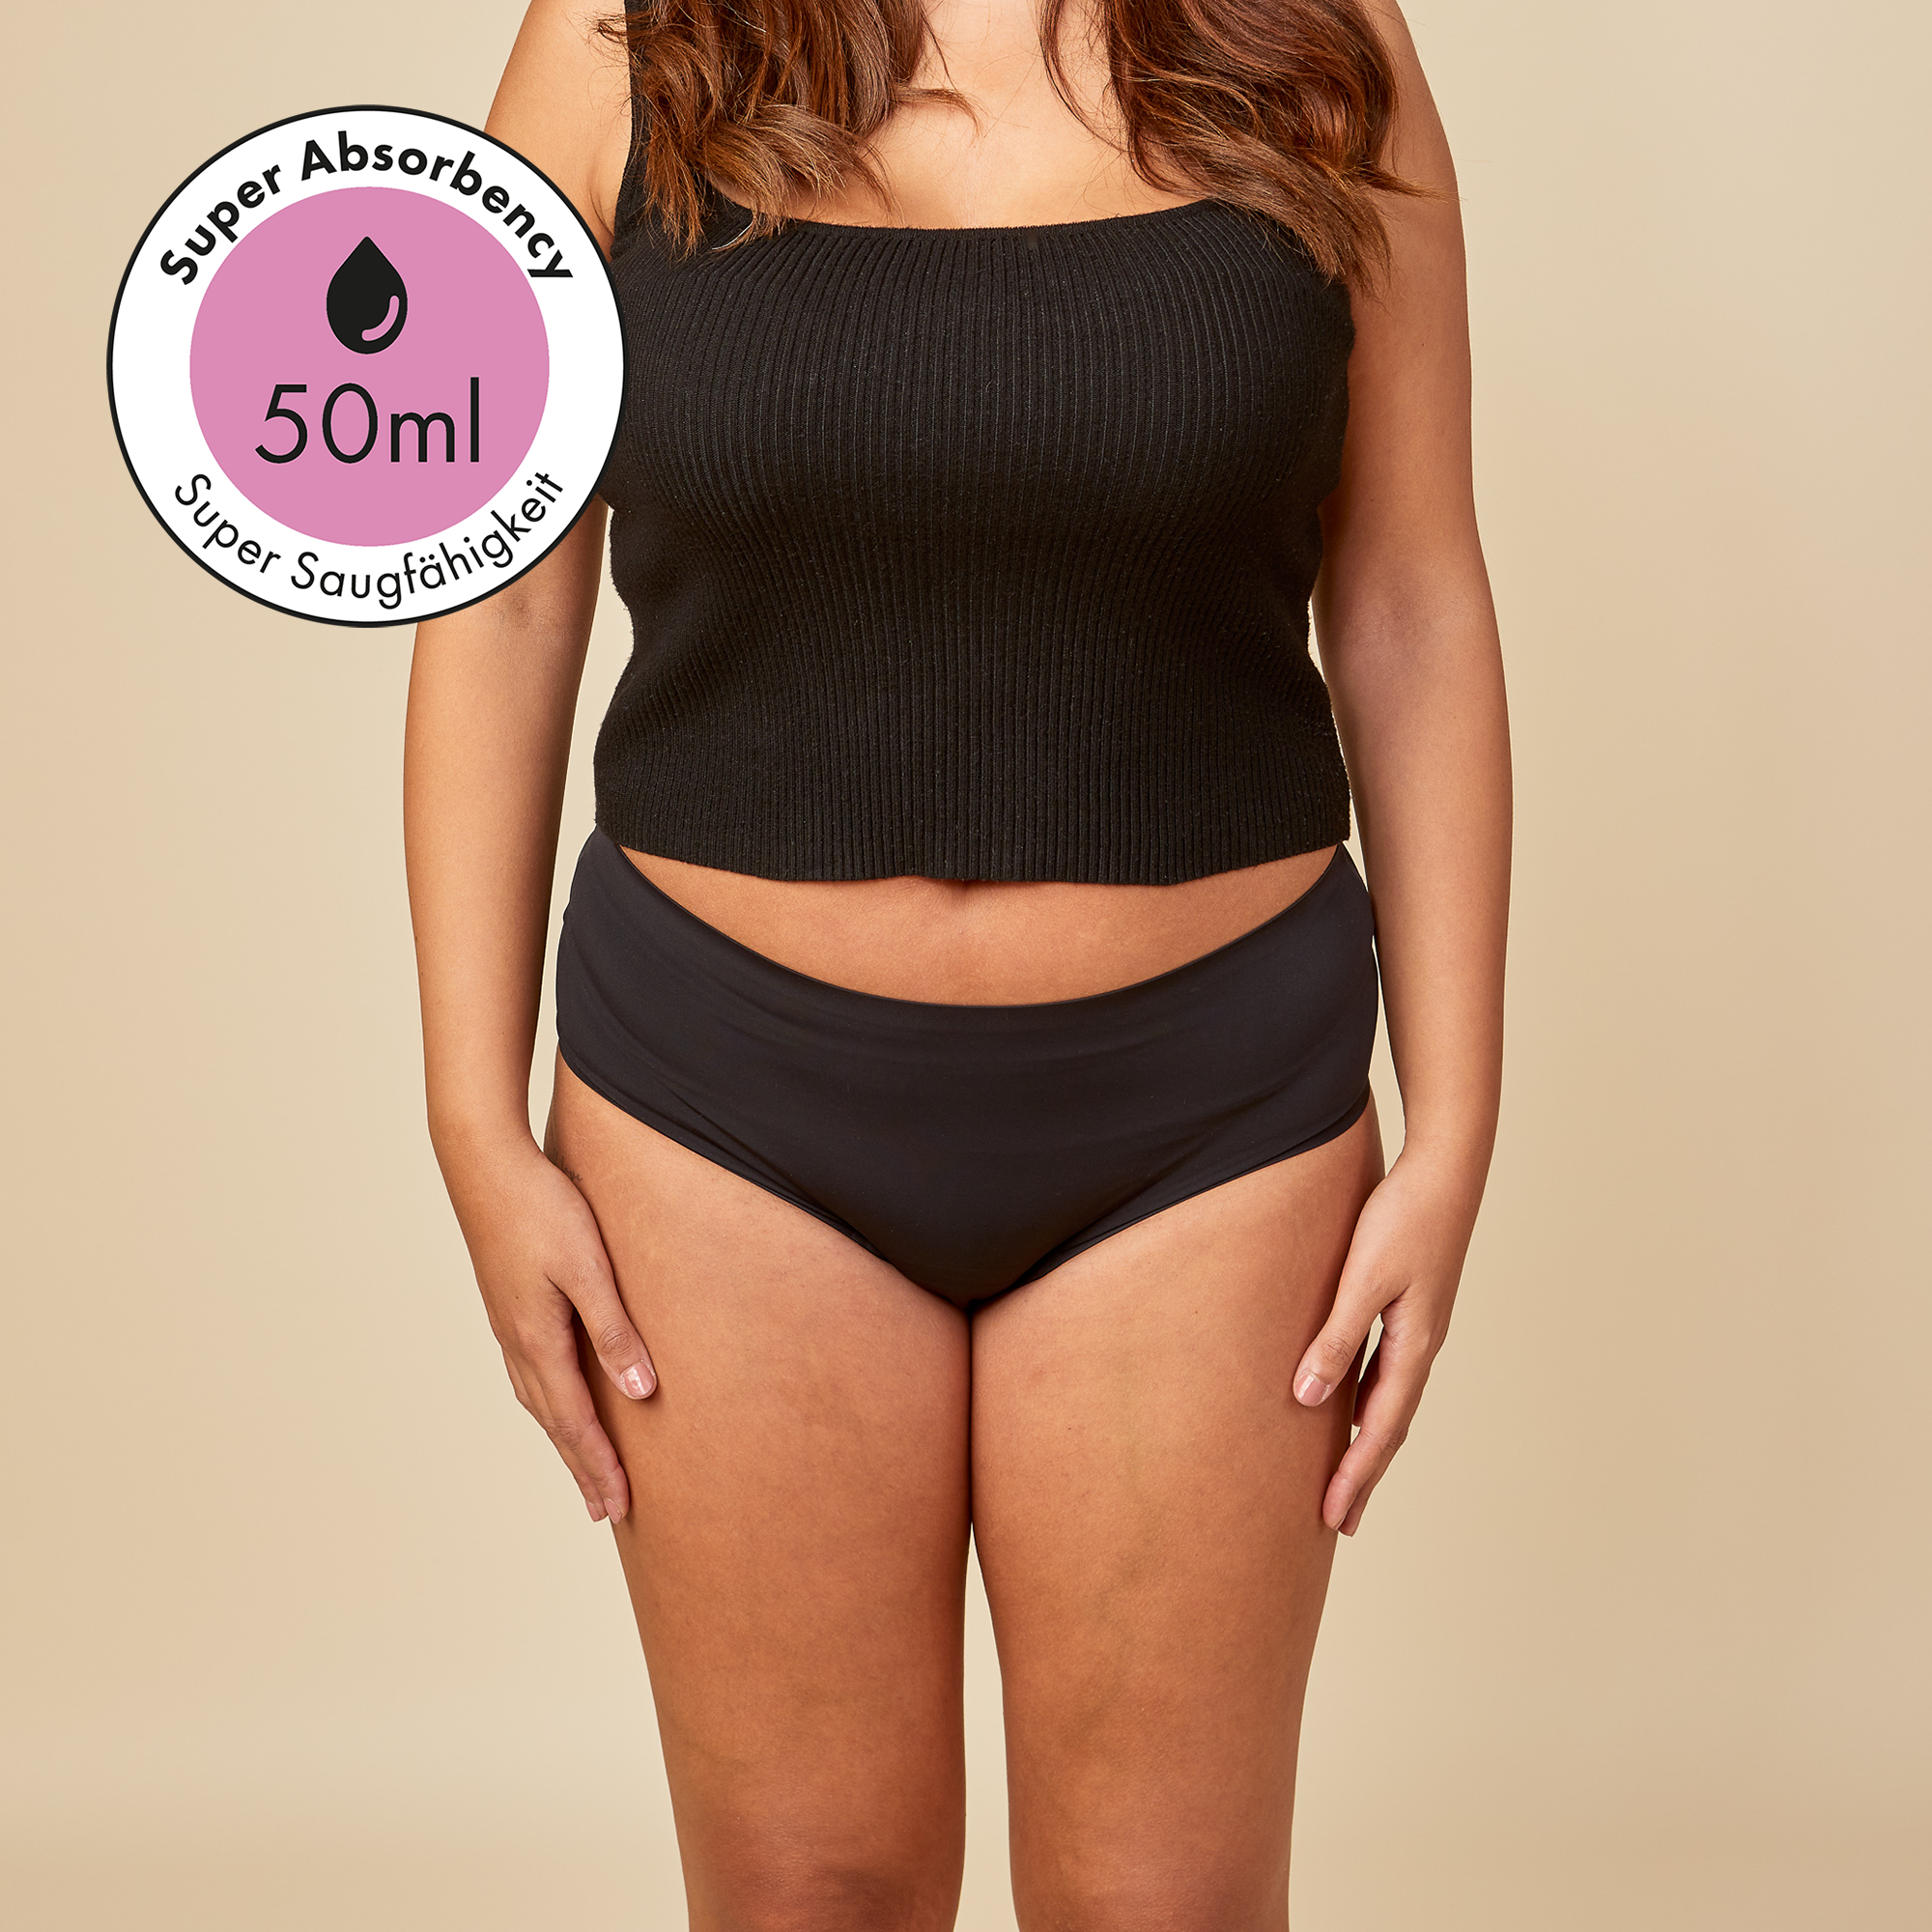 dais absorbent underwear for bladder leaks in high waist cut in black colour shown on model from the front. Super absorbency from up to 50ml. 